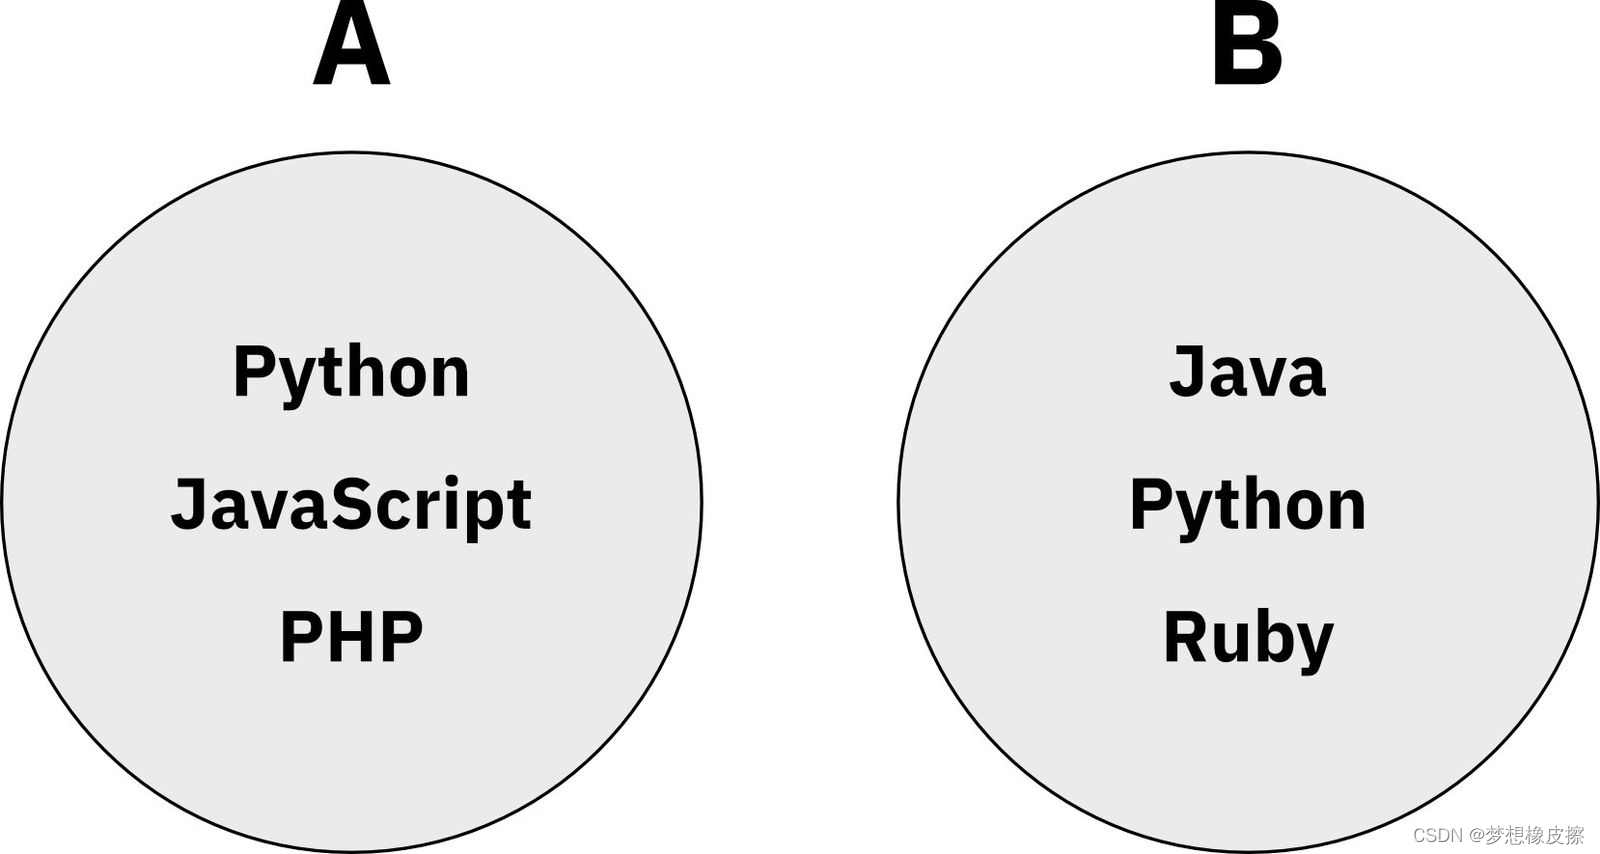 Image 1 – Two sets with programming languages (image by author)